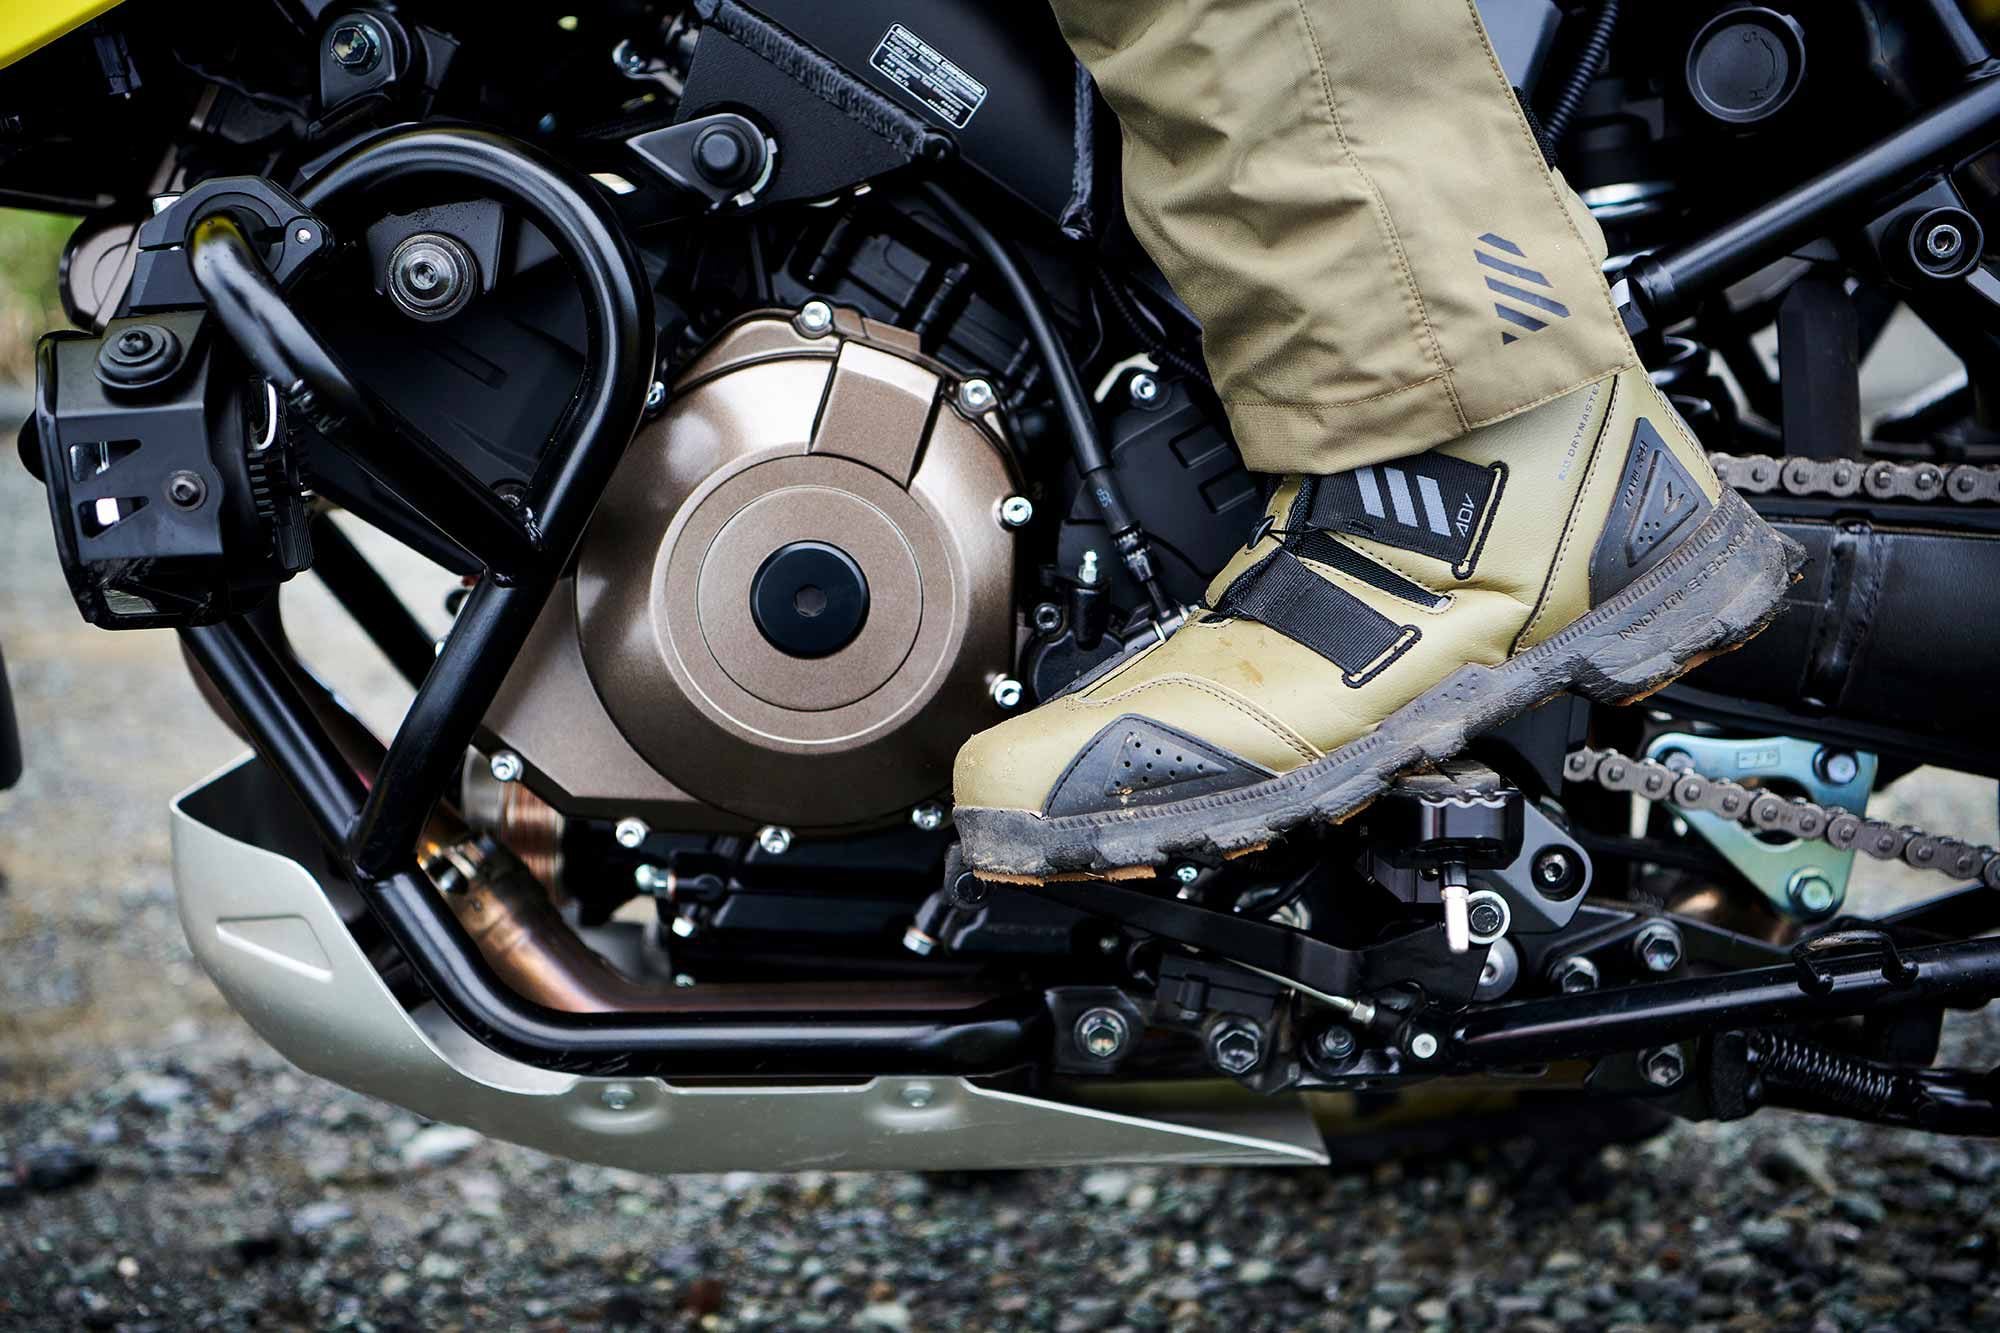 The DE and DE Adventure feature a new quickshifter, allowing easy movement up and down the gearbox.